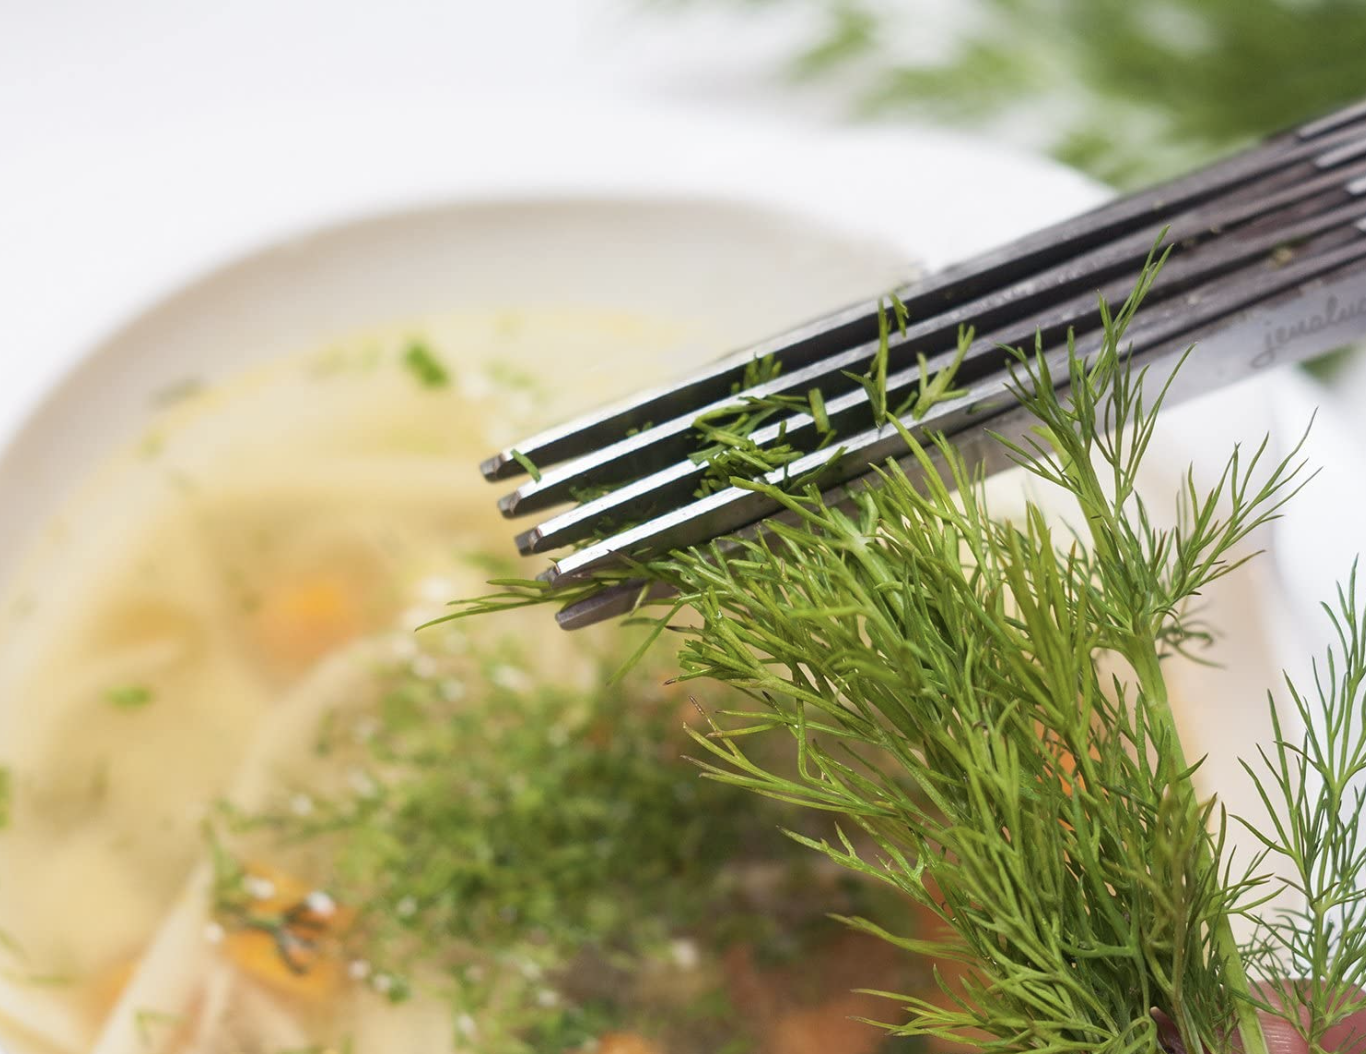 the scissors being used to clip herbs directly onto food in a plate